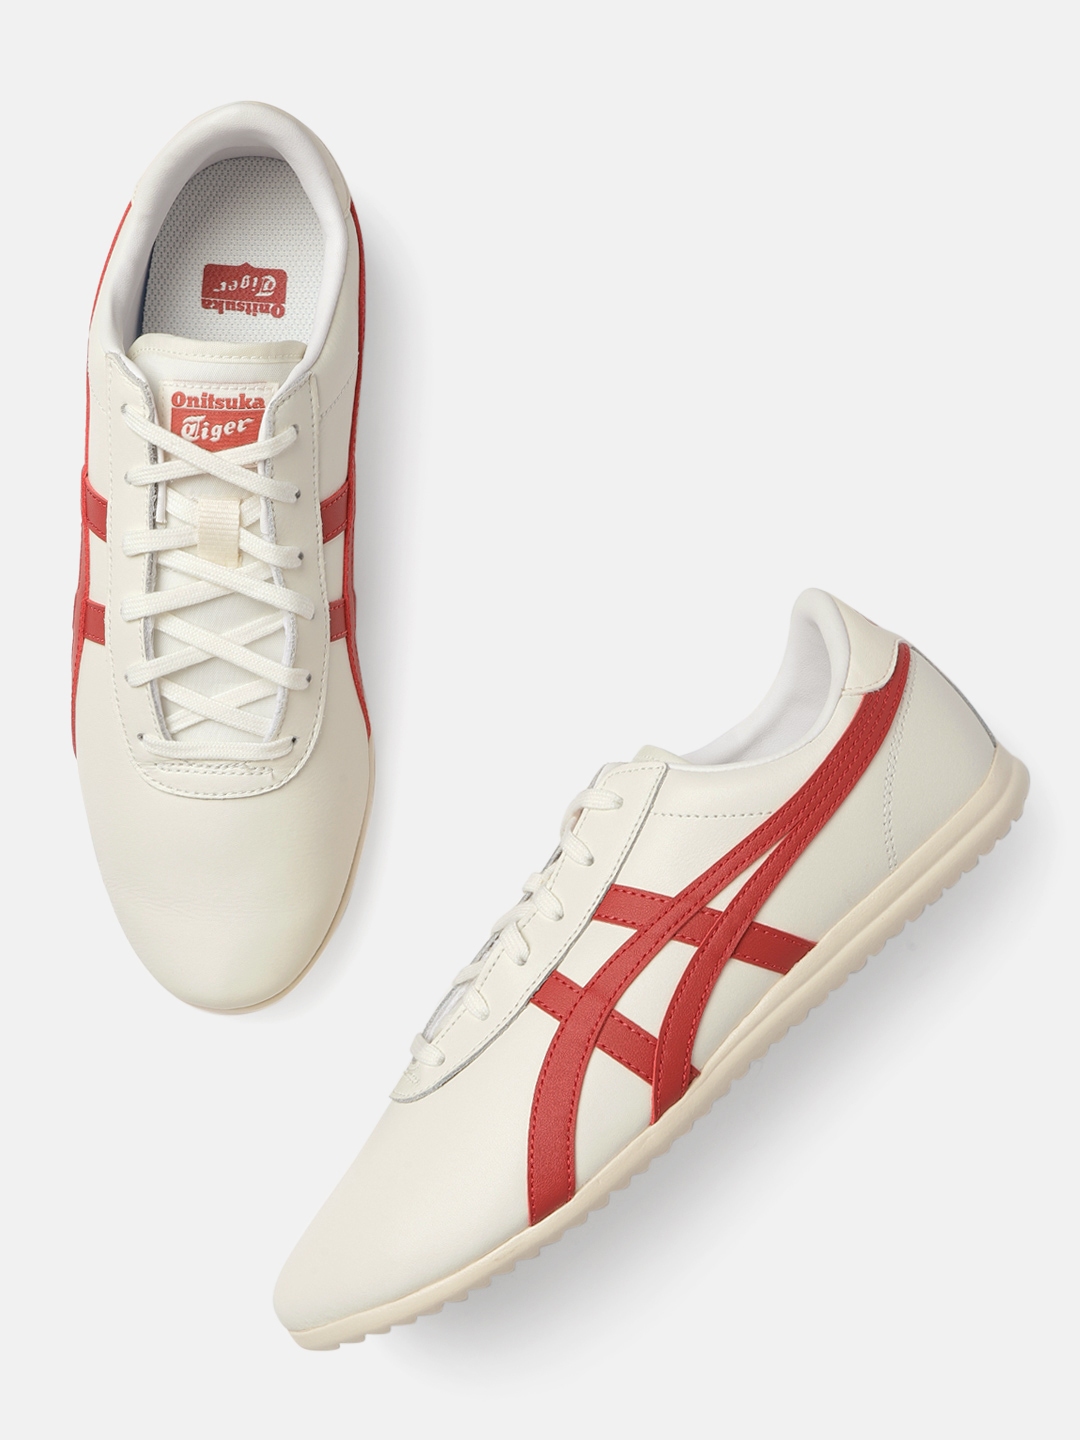 Buy Onitsuka Tiger Unisex Cream Coloured Red Leather Sneakers Tai Chi ...